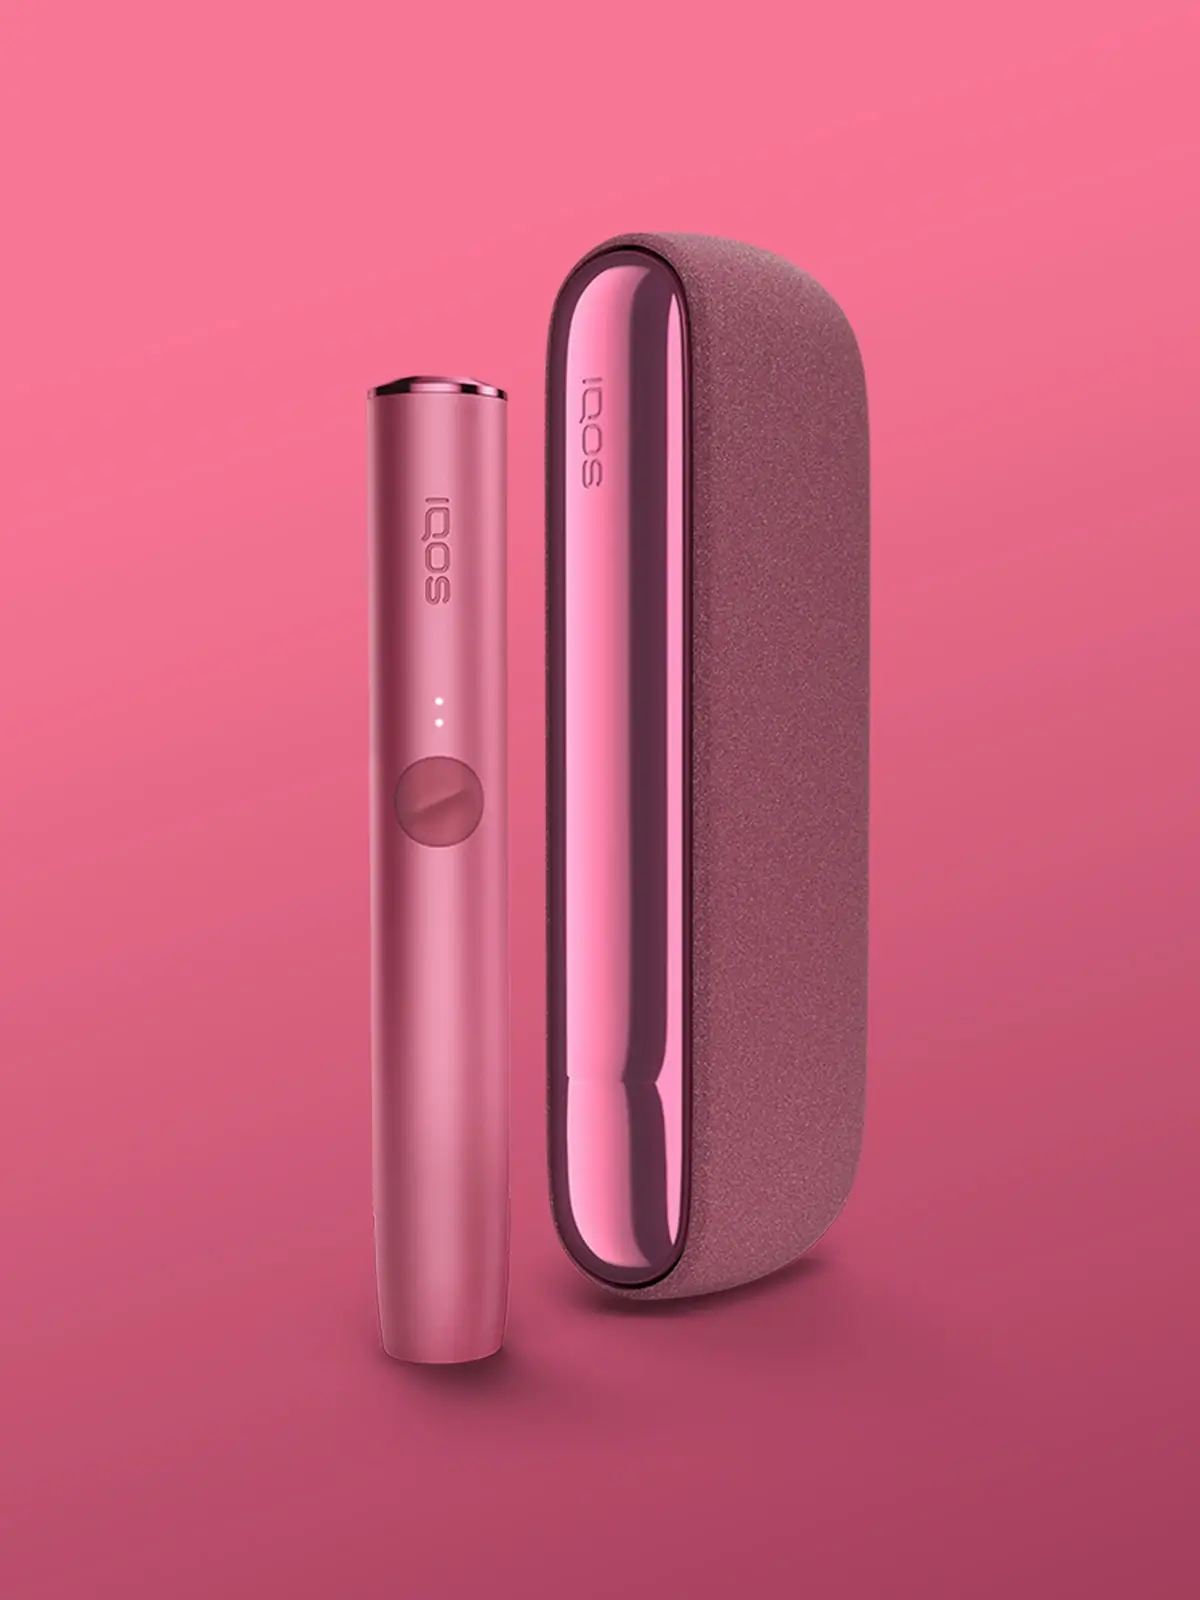 An IQOS ILUMA in Sunset Red colour, standing in front of a pink/sunset red background with its TEREA stick holder standing next to the charging case.